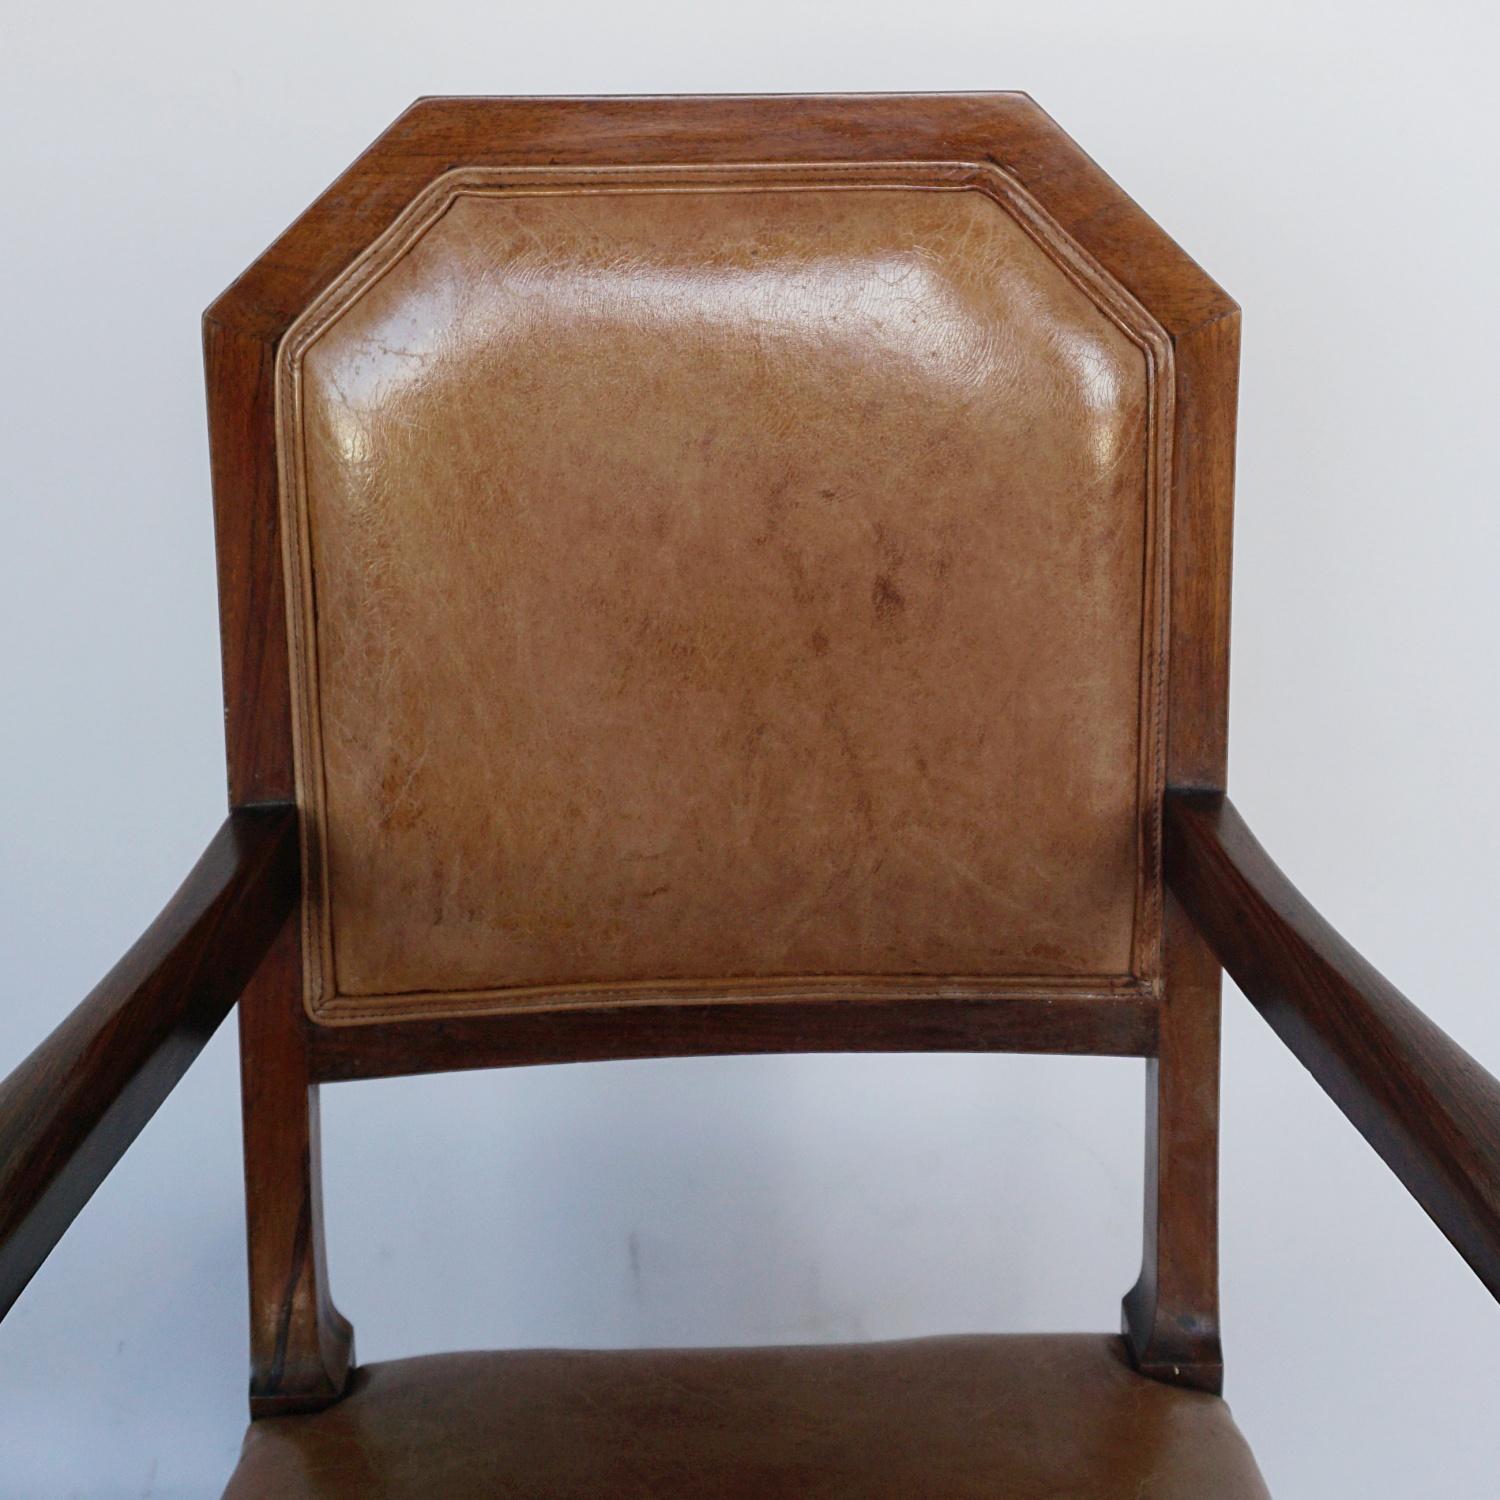 Early 20th Century French Art Deco Desk Chair Walnut and Leather, Circa 1925